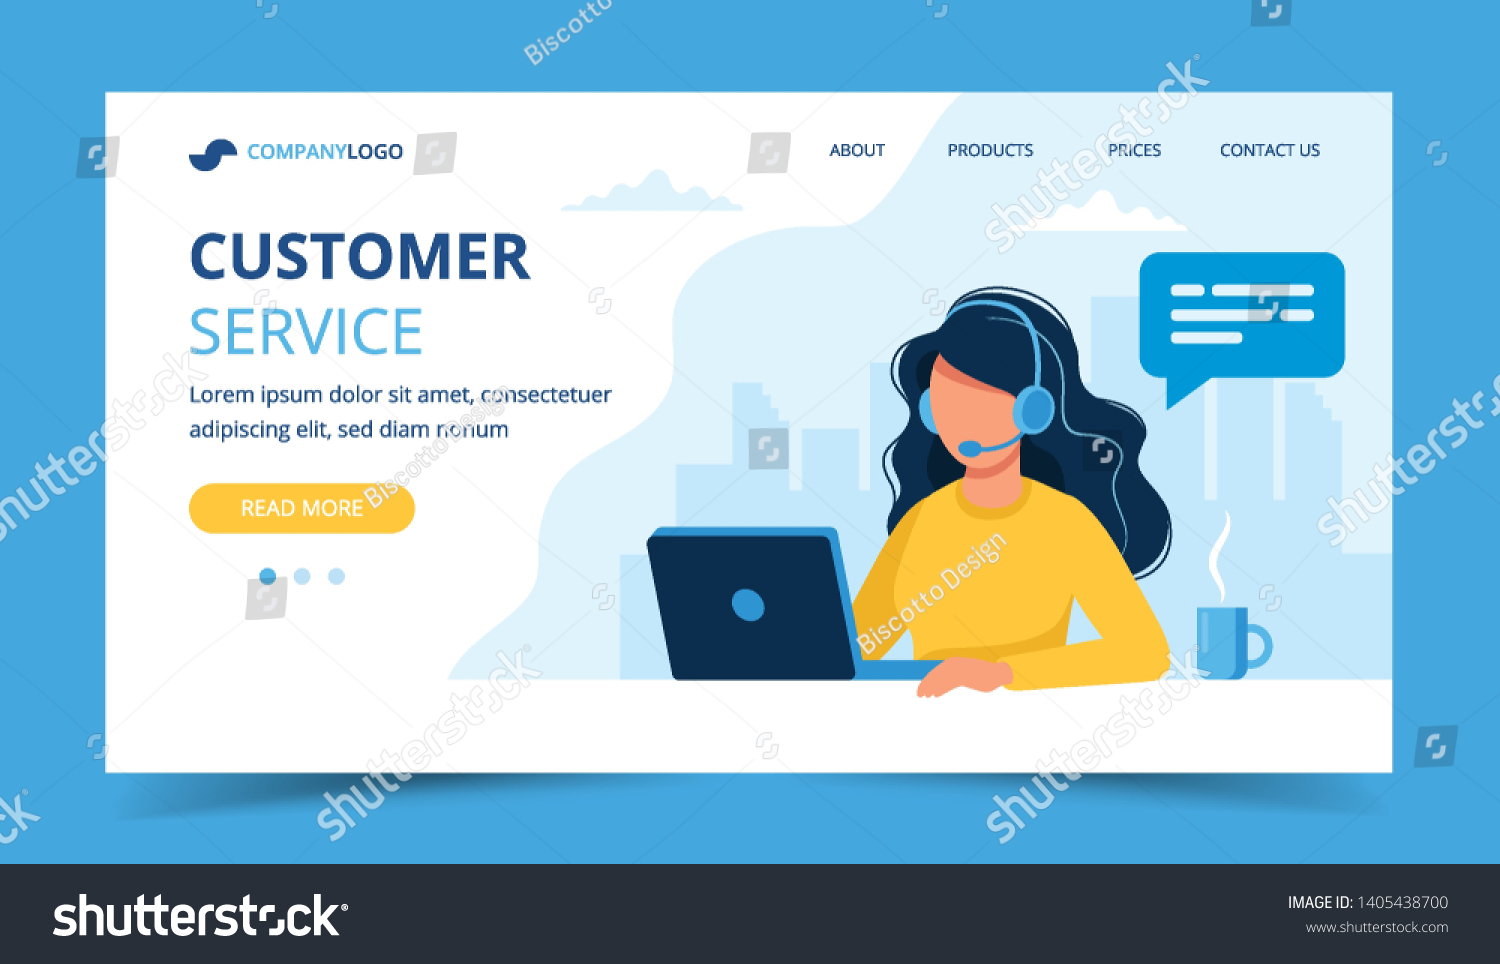 115,413 Customer service banner Images, Stock Photos & Vectors ...